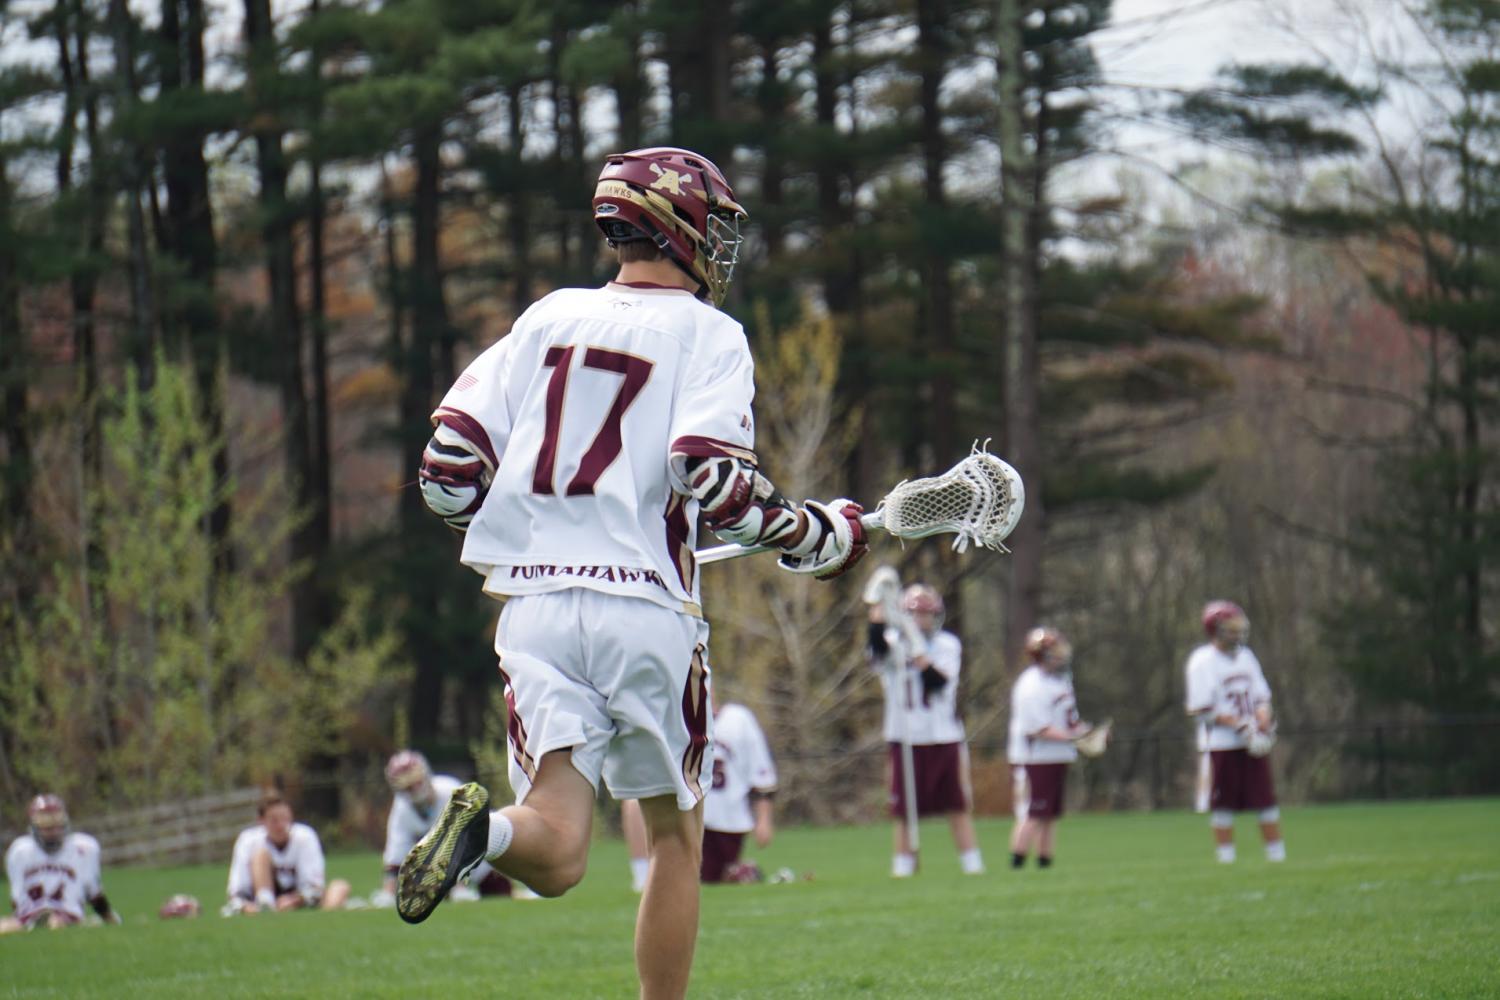 Although+starting+rough%2C+boys+lacrosse+has+high+hopes+after+the+big+win+against+Westborough.